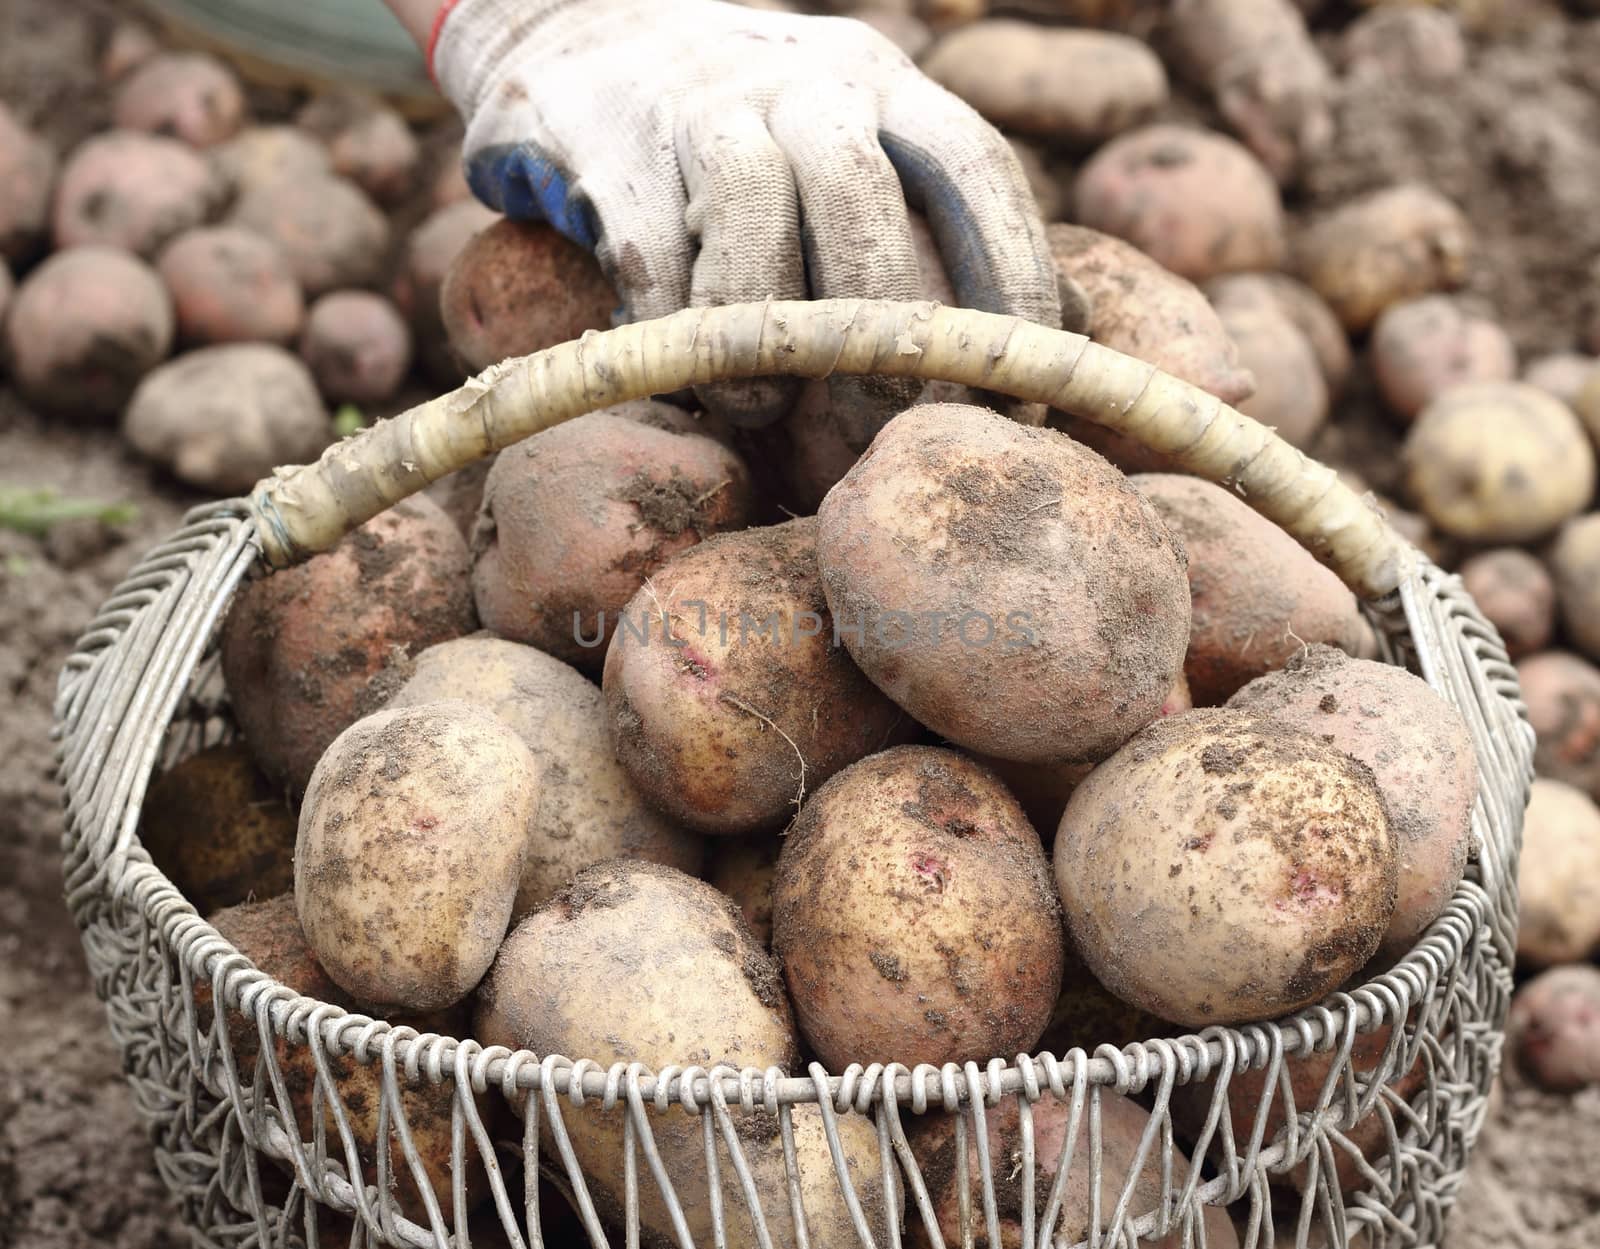 Farmer in collects organic potatoes in a basket